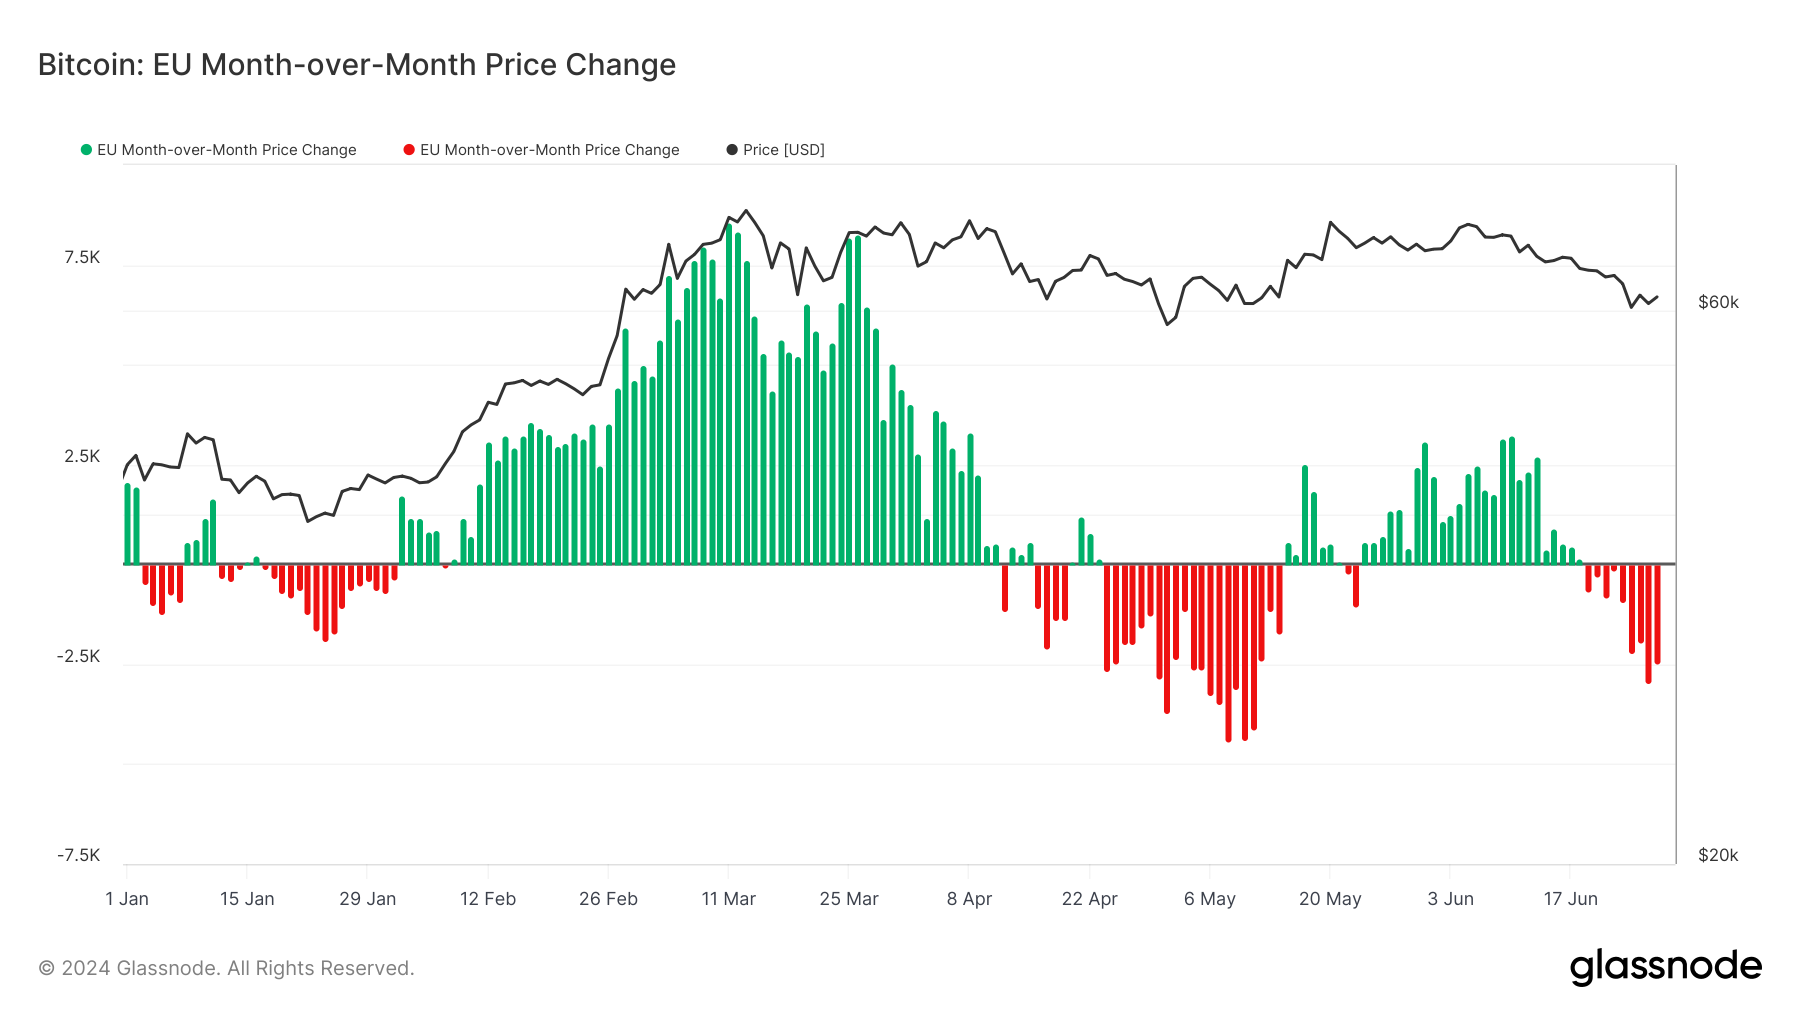 Bitcoin: EU Month Over Month Price Change: (Source: Glassnode)